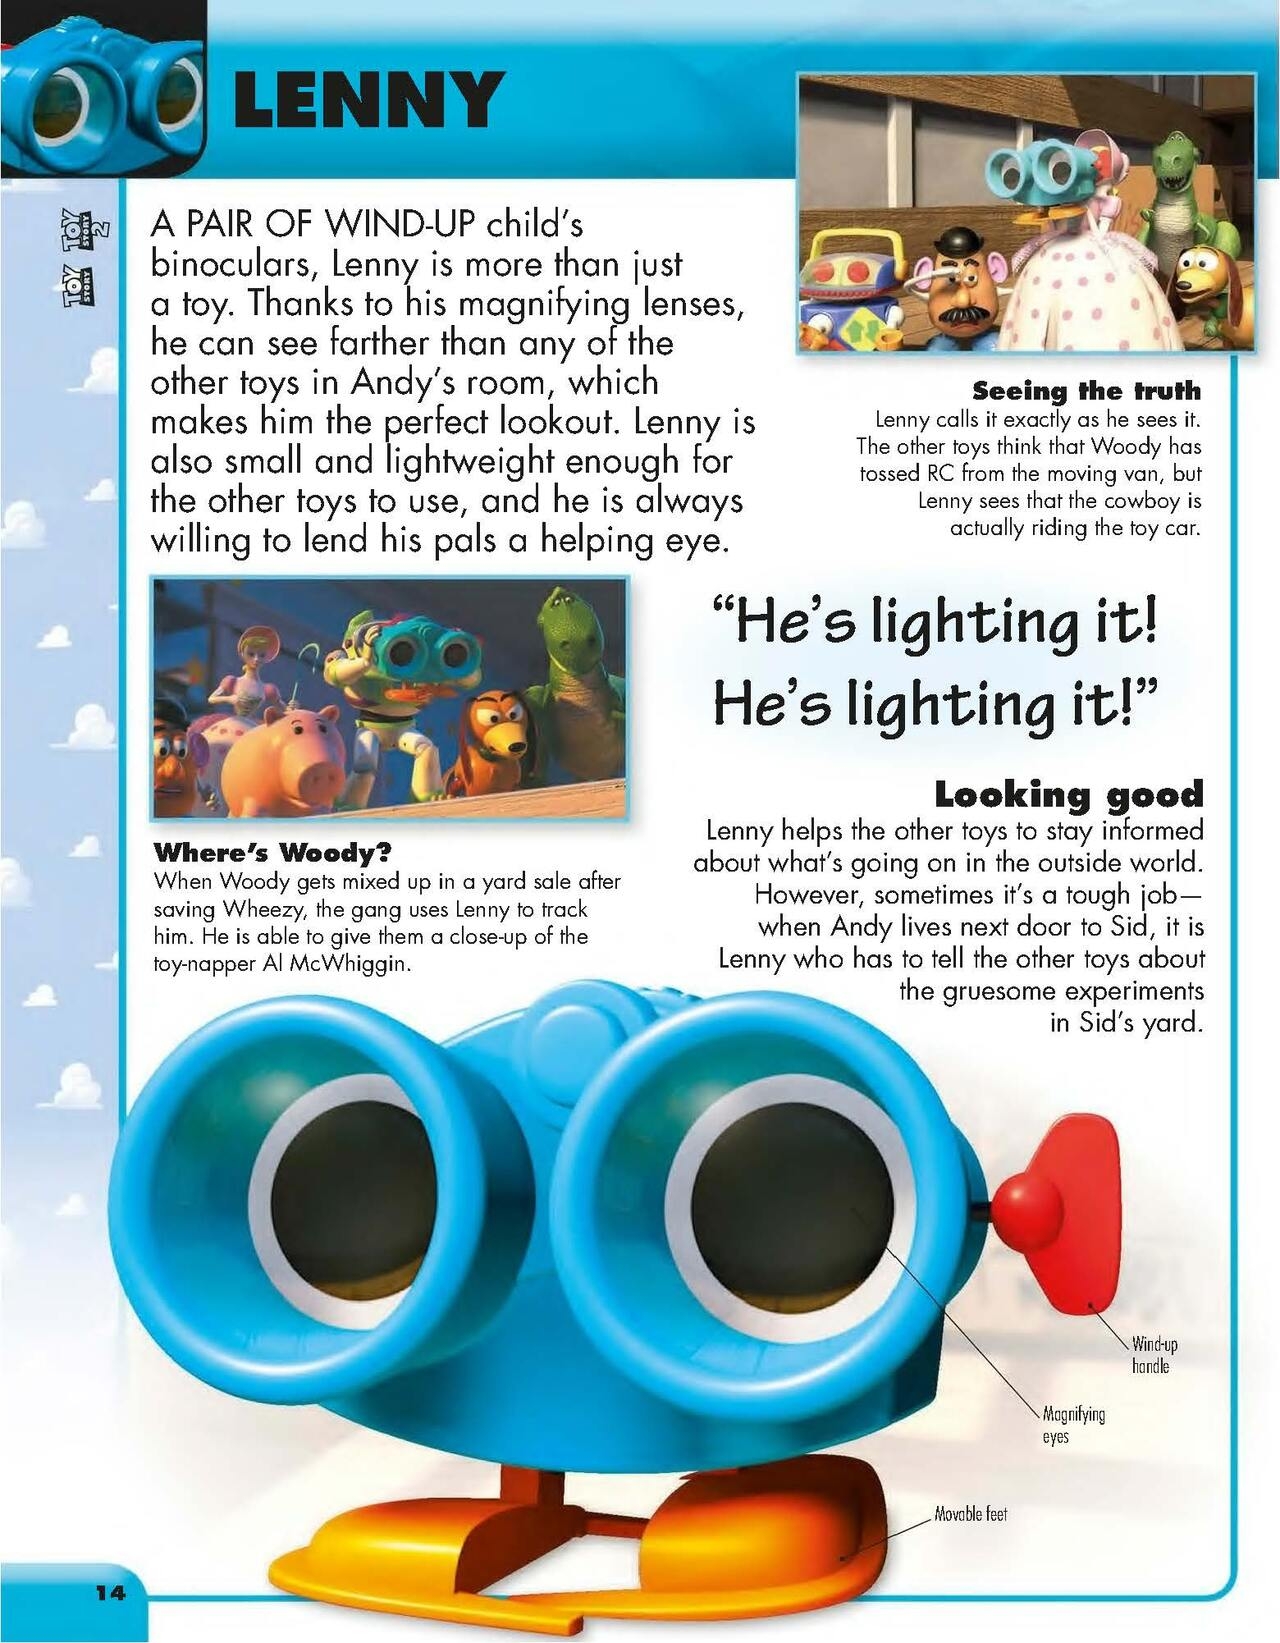 Disney Pixar Character Encyclopedia Updated and Expanded 15